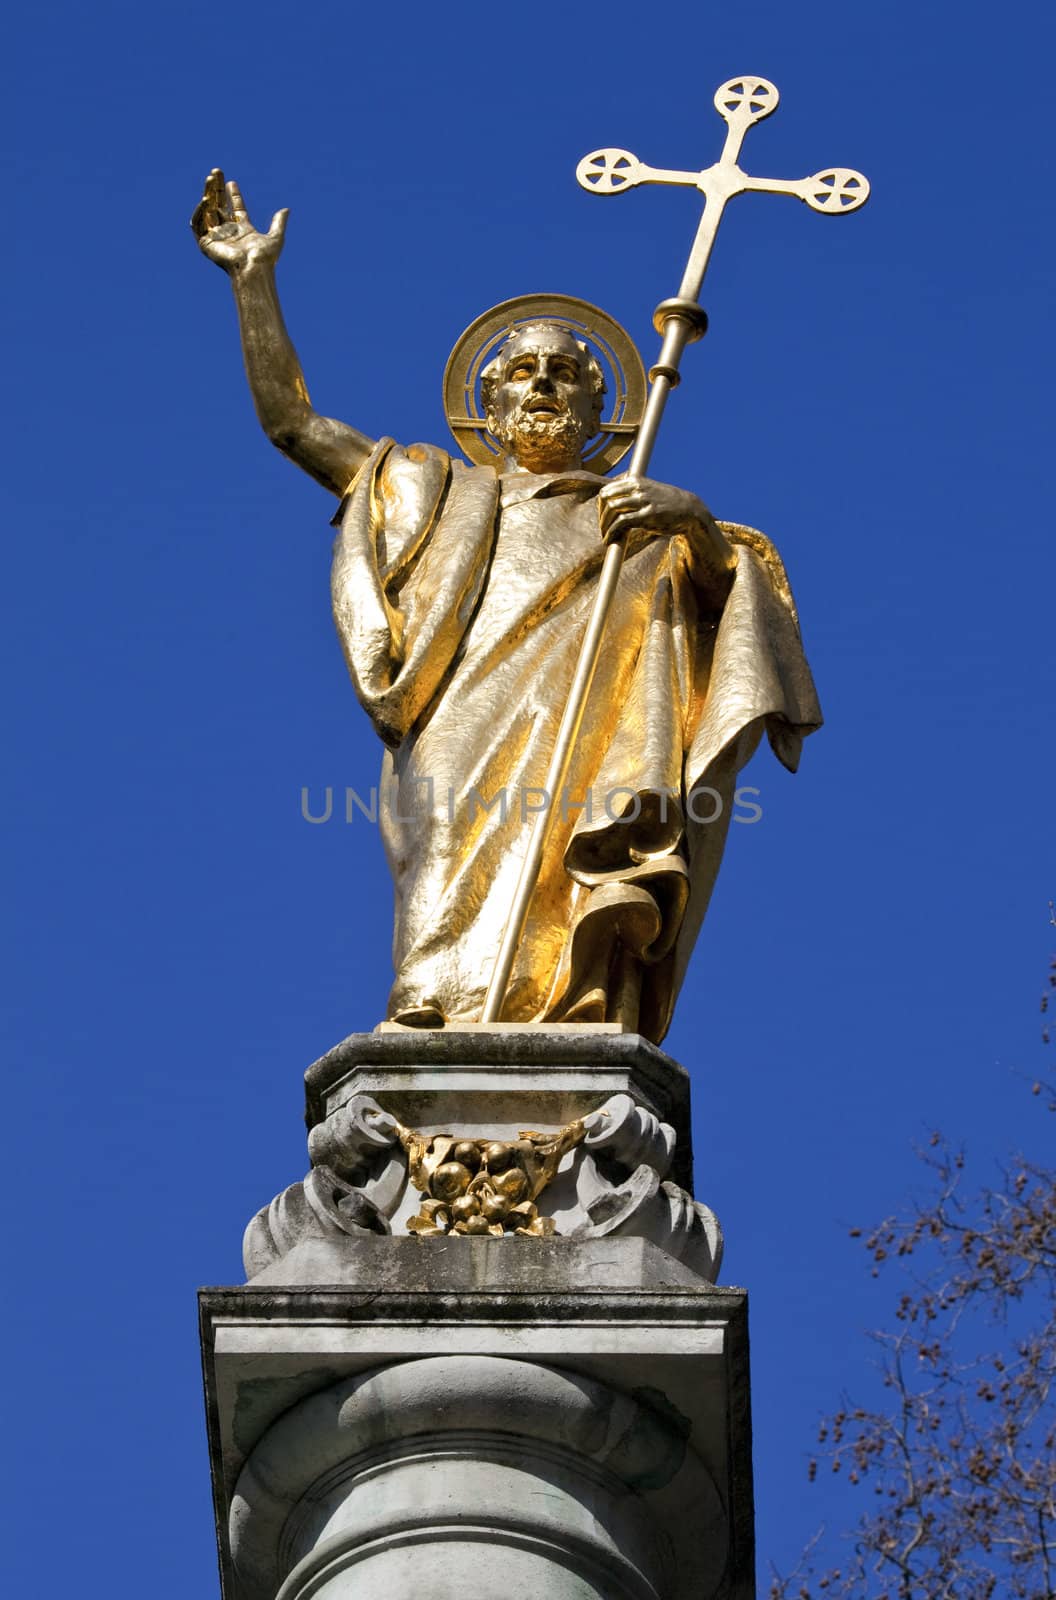 Saint Paul Statue at St. Pauls Cathedral in London by chrisdorney